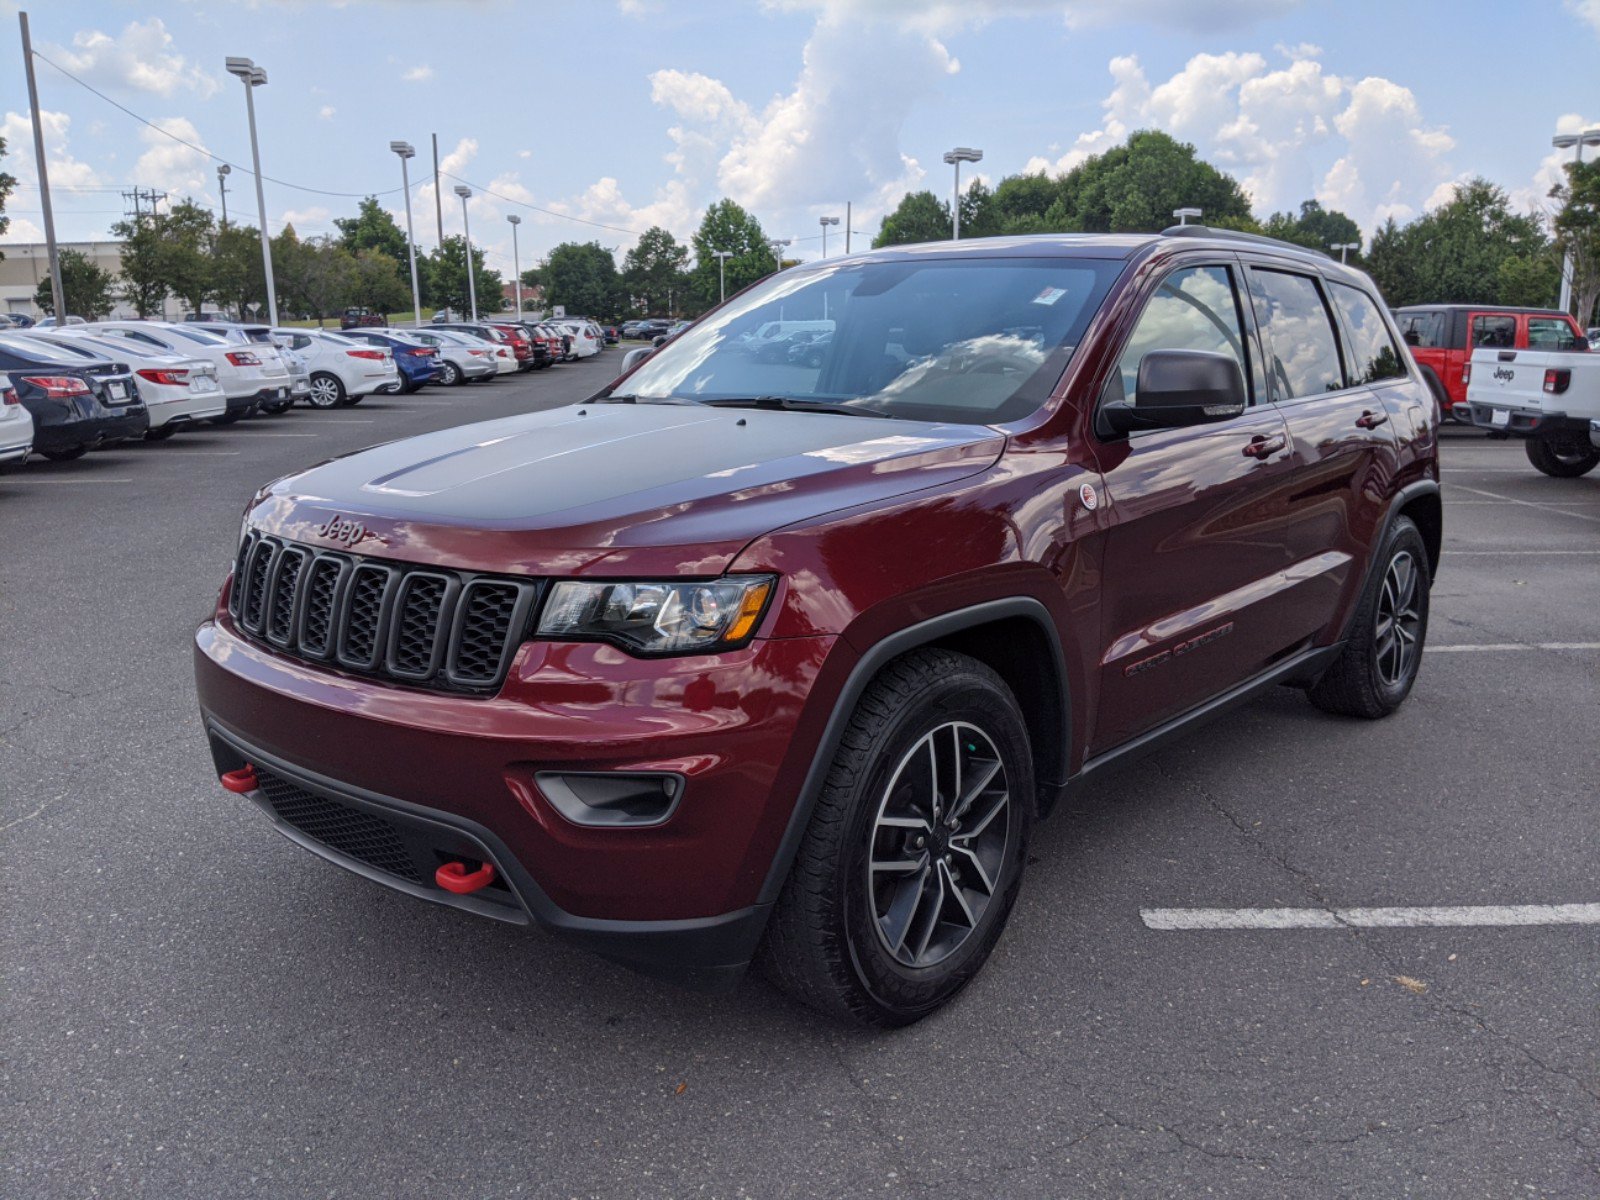 PreOwned 2020 Jeep Grand Cherokee Trailhawk With